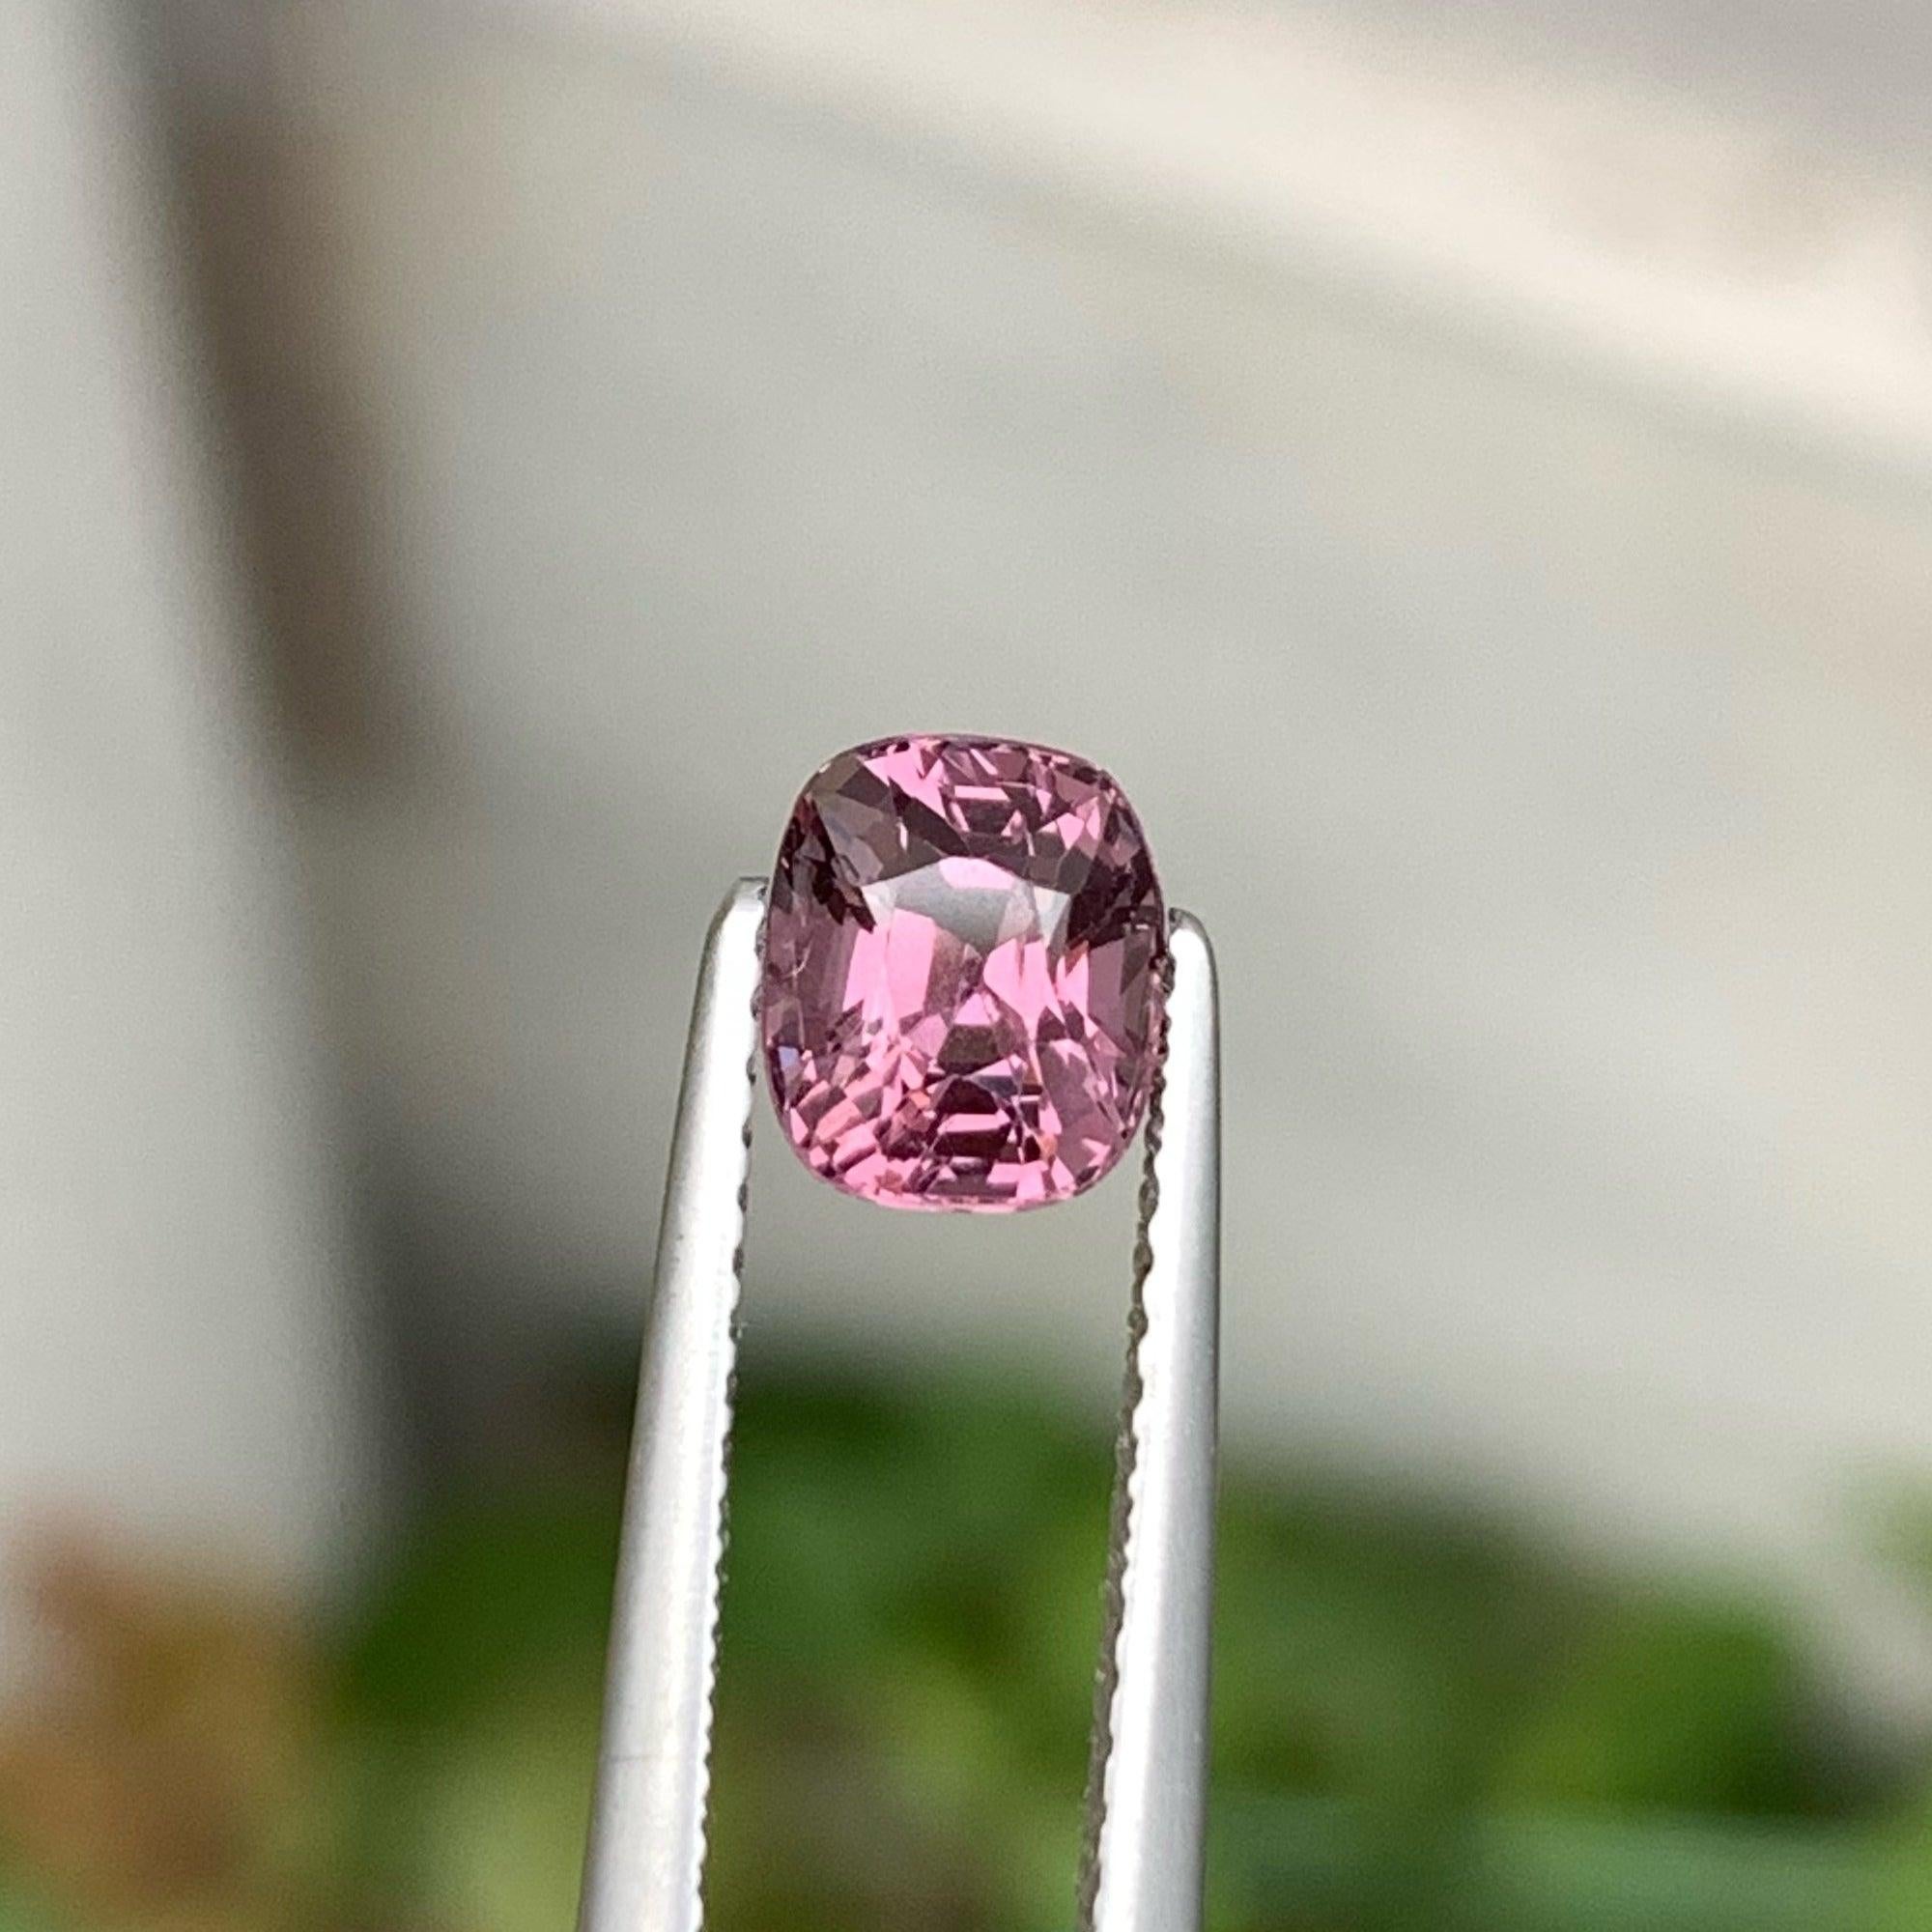 Modern Brilliant Cut Natural Spinel Gemstone 1.25 Carats Loose Spinel For Jewelry Use For Sale